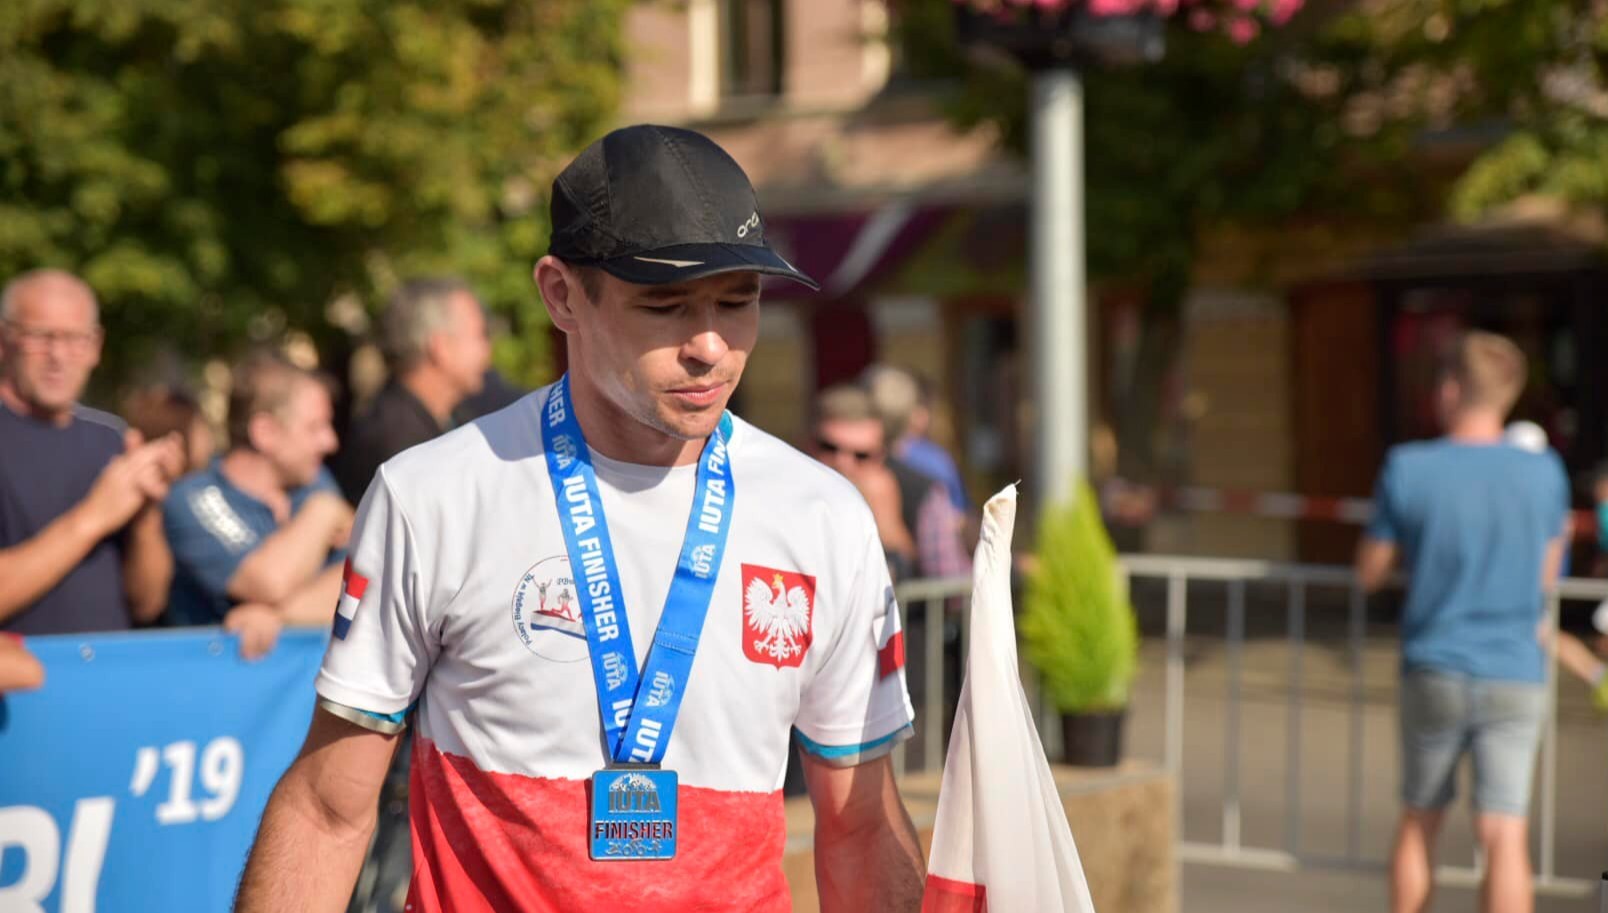 Adrian Kostera broke the world record and won 2nd edition of the Ultra-Triathlon in Colmar